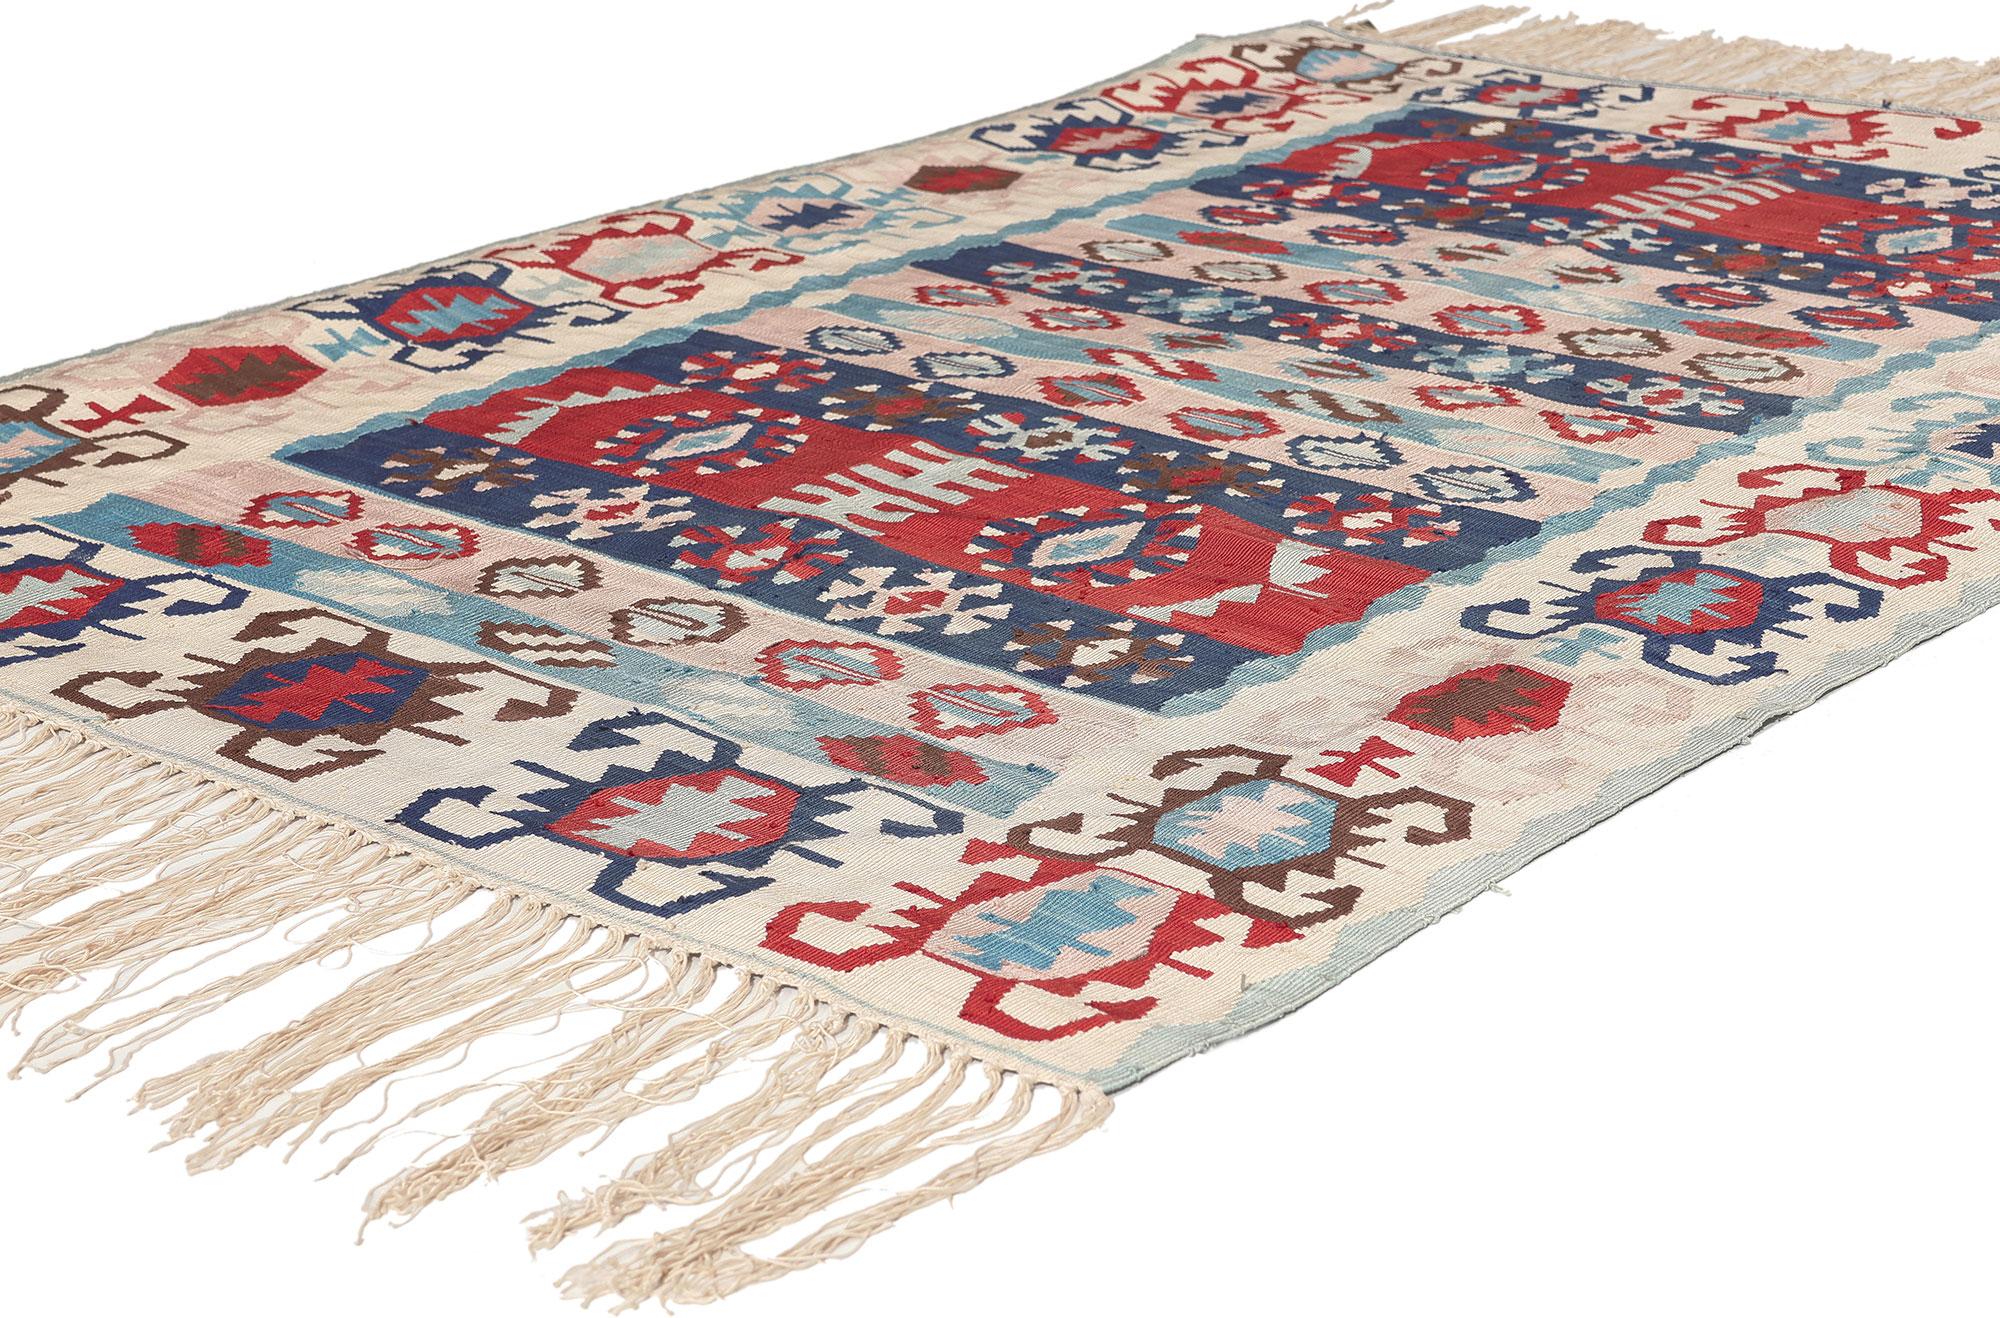 78644 Vintage Turkish Kilim Silk Rug, 03'07 x 05'03.
Boho chic meets patriotic flair in this handwoven Turkish kilim silk rug. The bold tribal design and classic colors woven into this piece work together creating a relaxed yet elevated feel such as